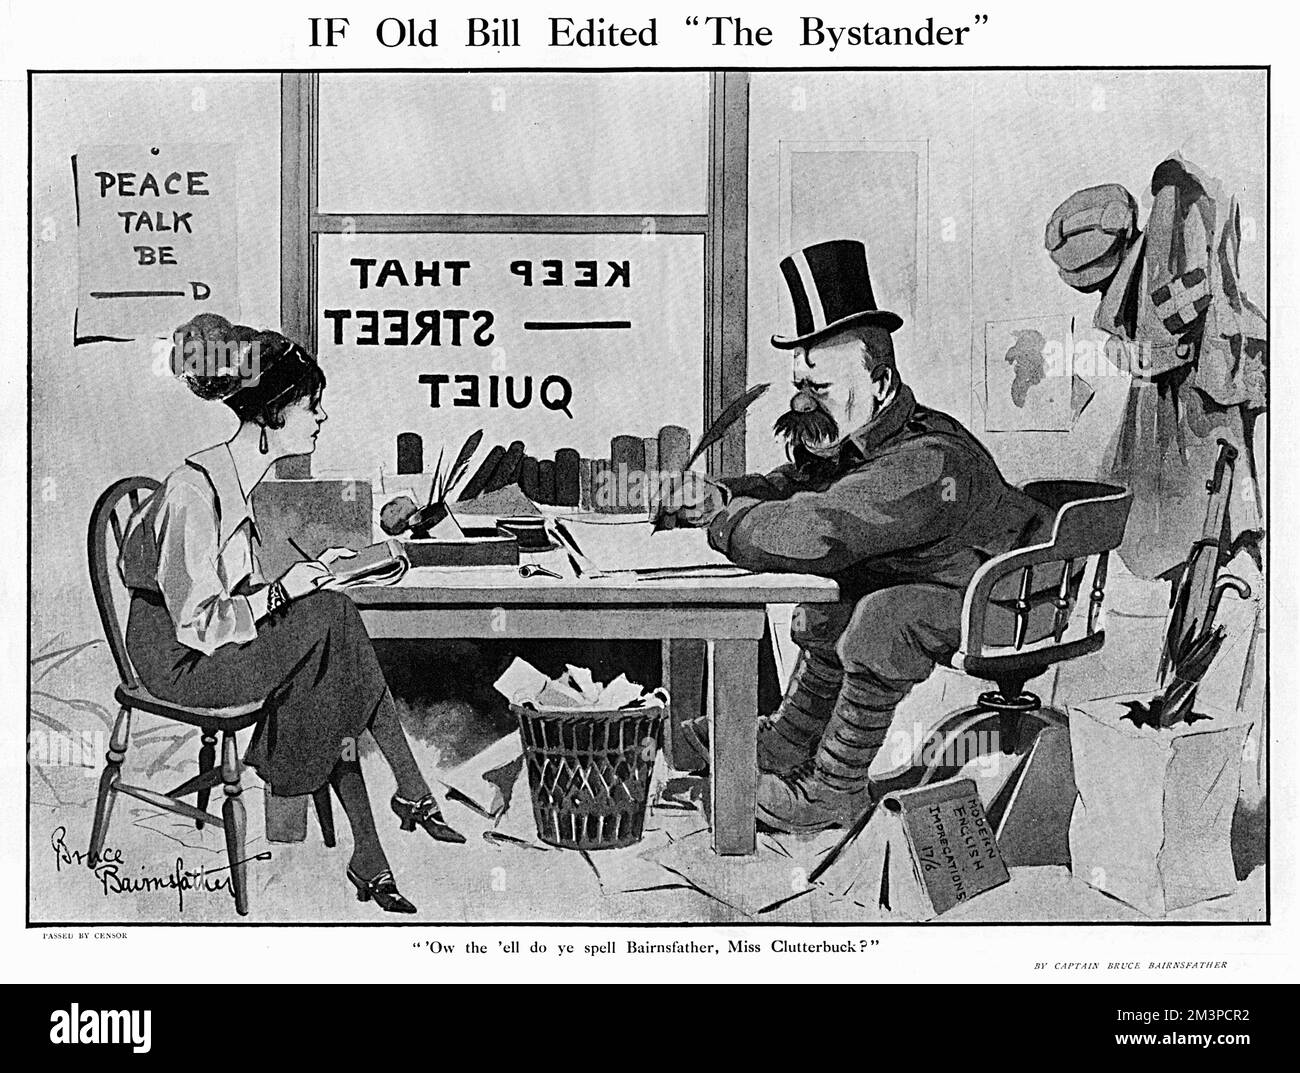 'IF Old Bill Edited &quot;The Bystander&quot;'    &quot;'Ow the 'ell do ye spell Bairnsfather, Miss Clutterbuck?&quot;    A cartoon by Captain Bruce Bairnsfather which appeared in an issue of The Bystander themed around the word 'If'. His popular character Old Bill struggles with the spelling of his own creator and seeks advice from a secretary.     Date: 1917 Stock Photo